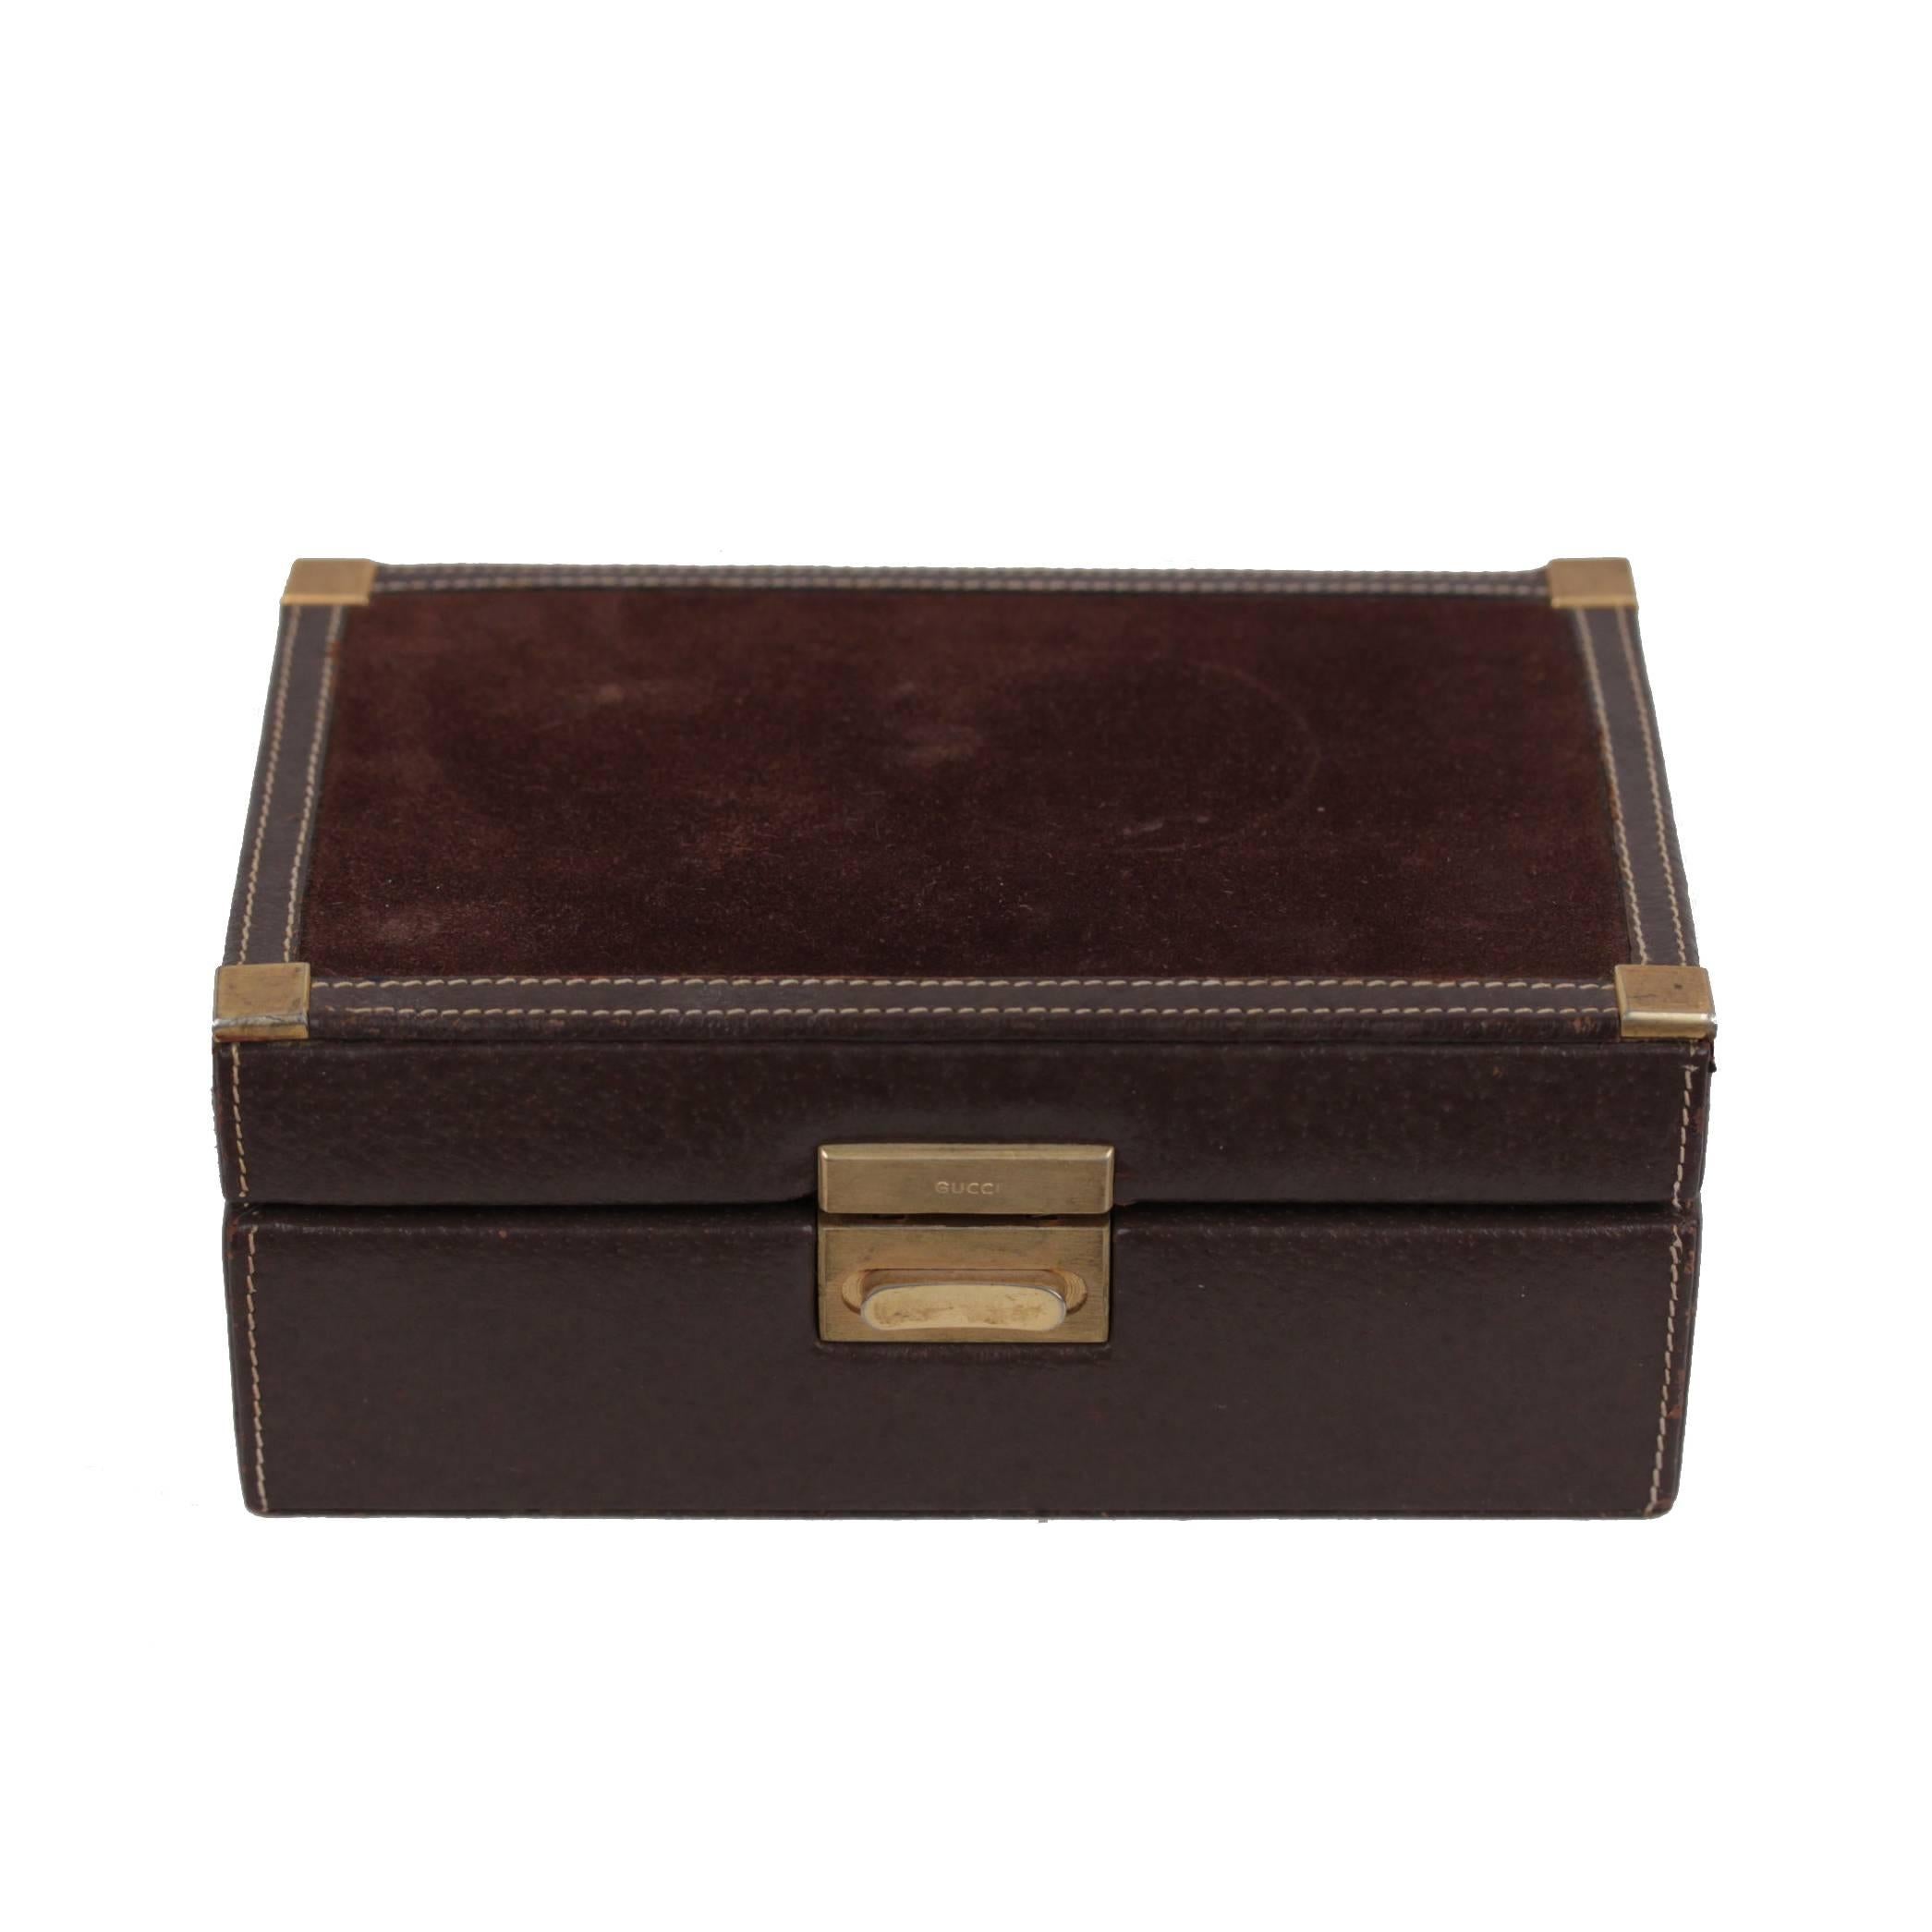 GUCCI Italian VINTAGE Brown Suede & Leather JEWELRY BOX Case